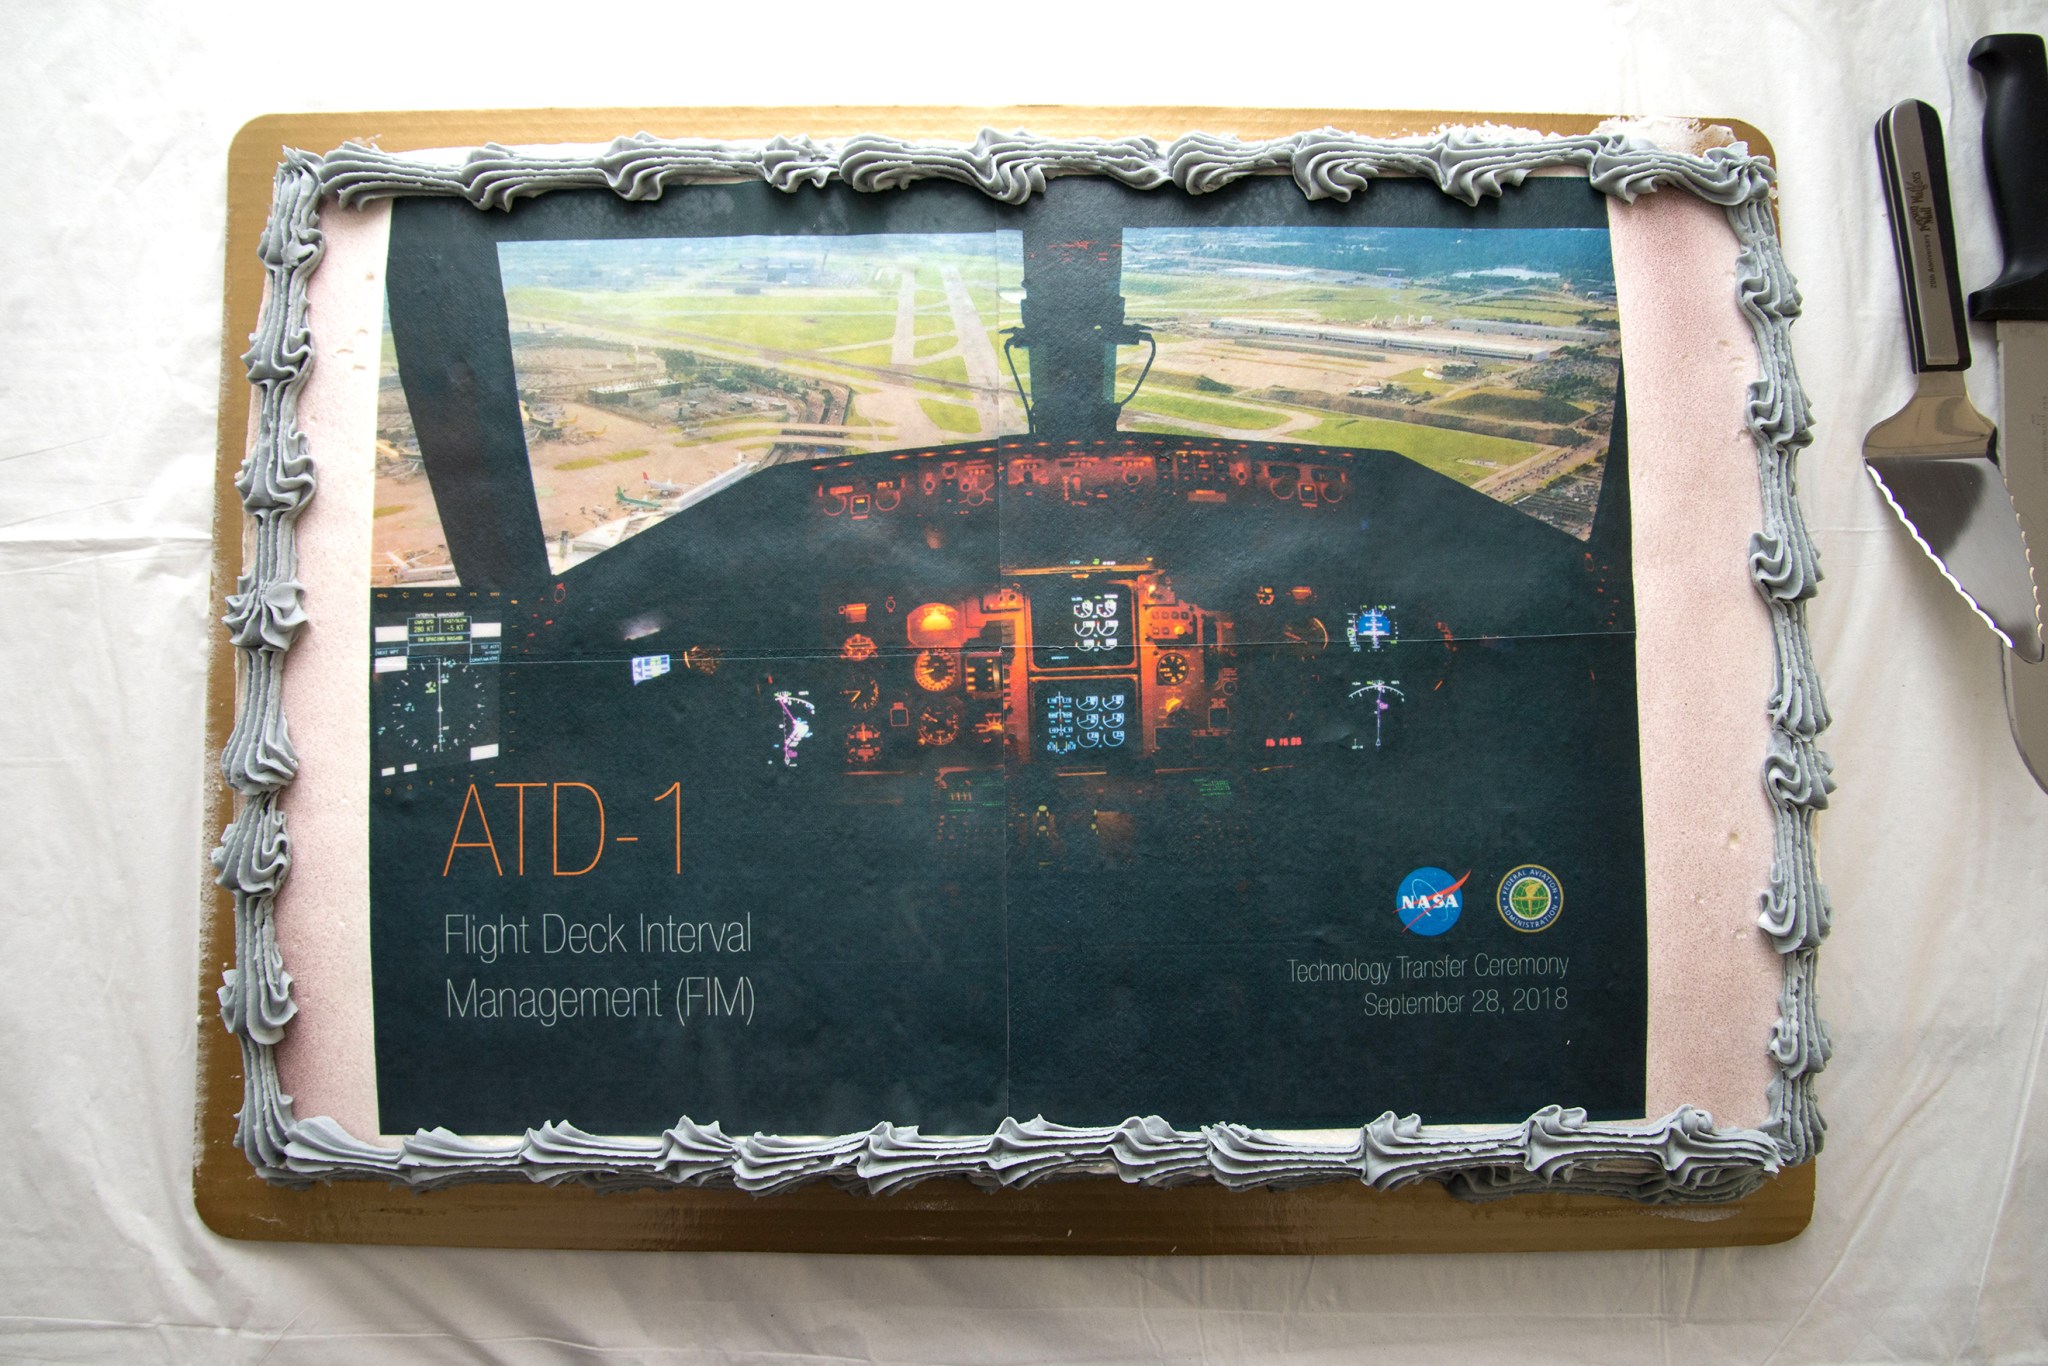 The Cake presented during the transfer ceremony.